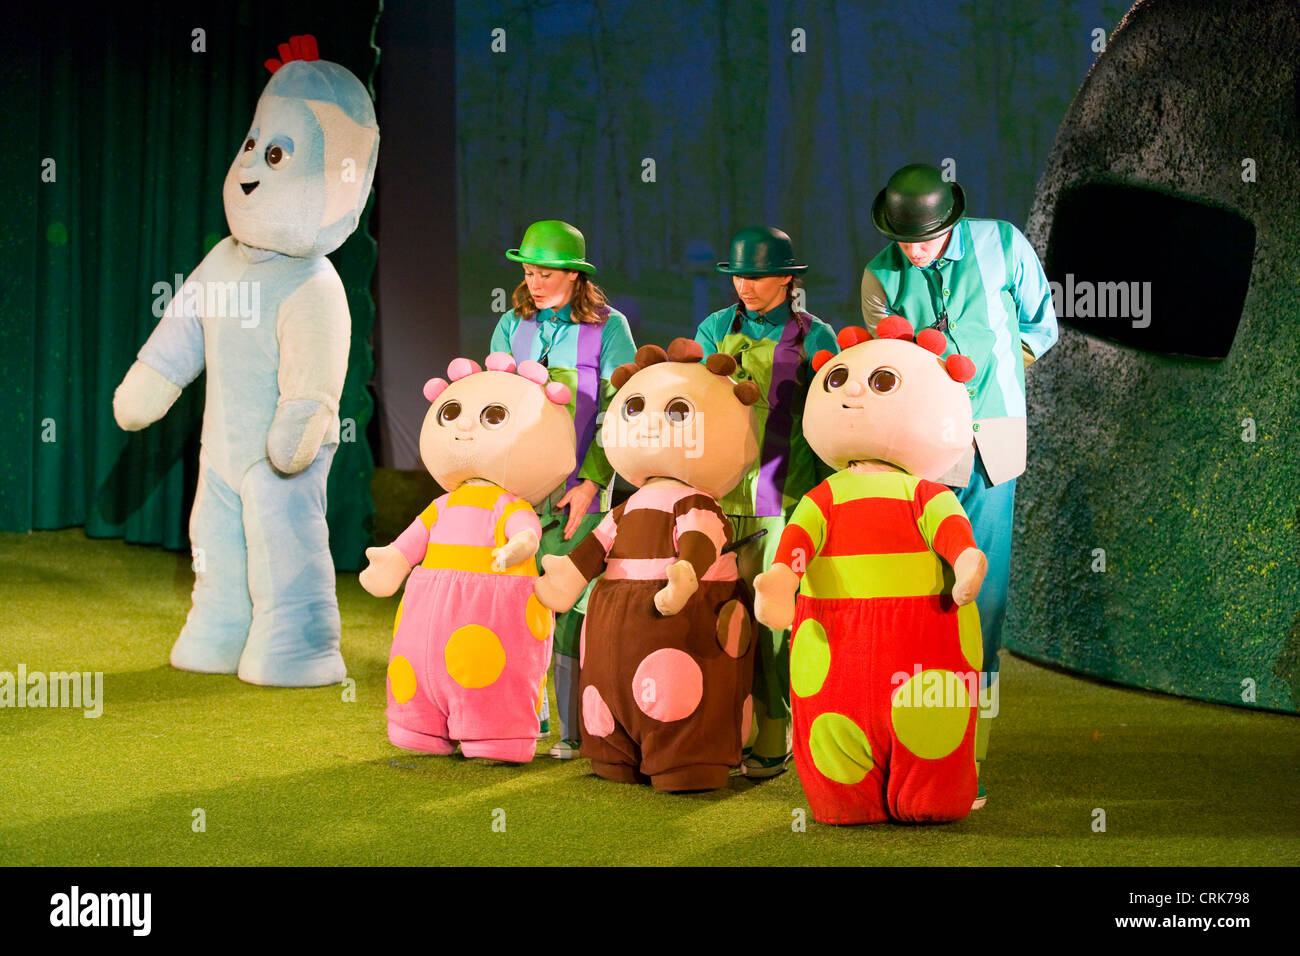 The Tombliboos / Tombliboo with Upsy Daisy & Iggle Piggle: In The Night  Garden character / characters. UK Stock Photo - Alamy